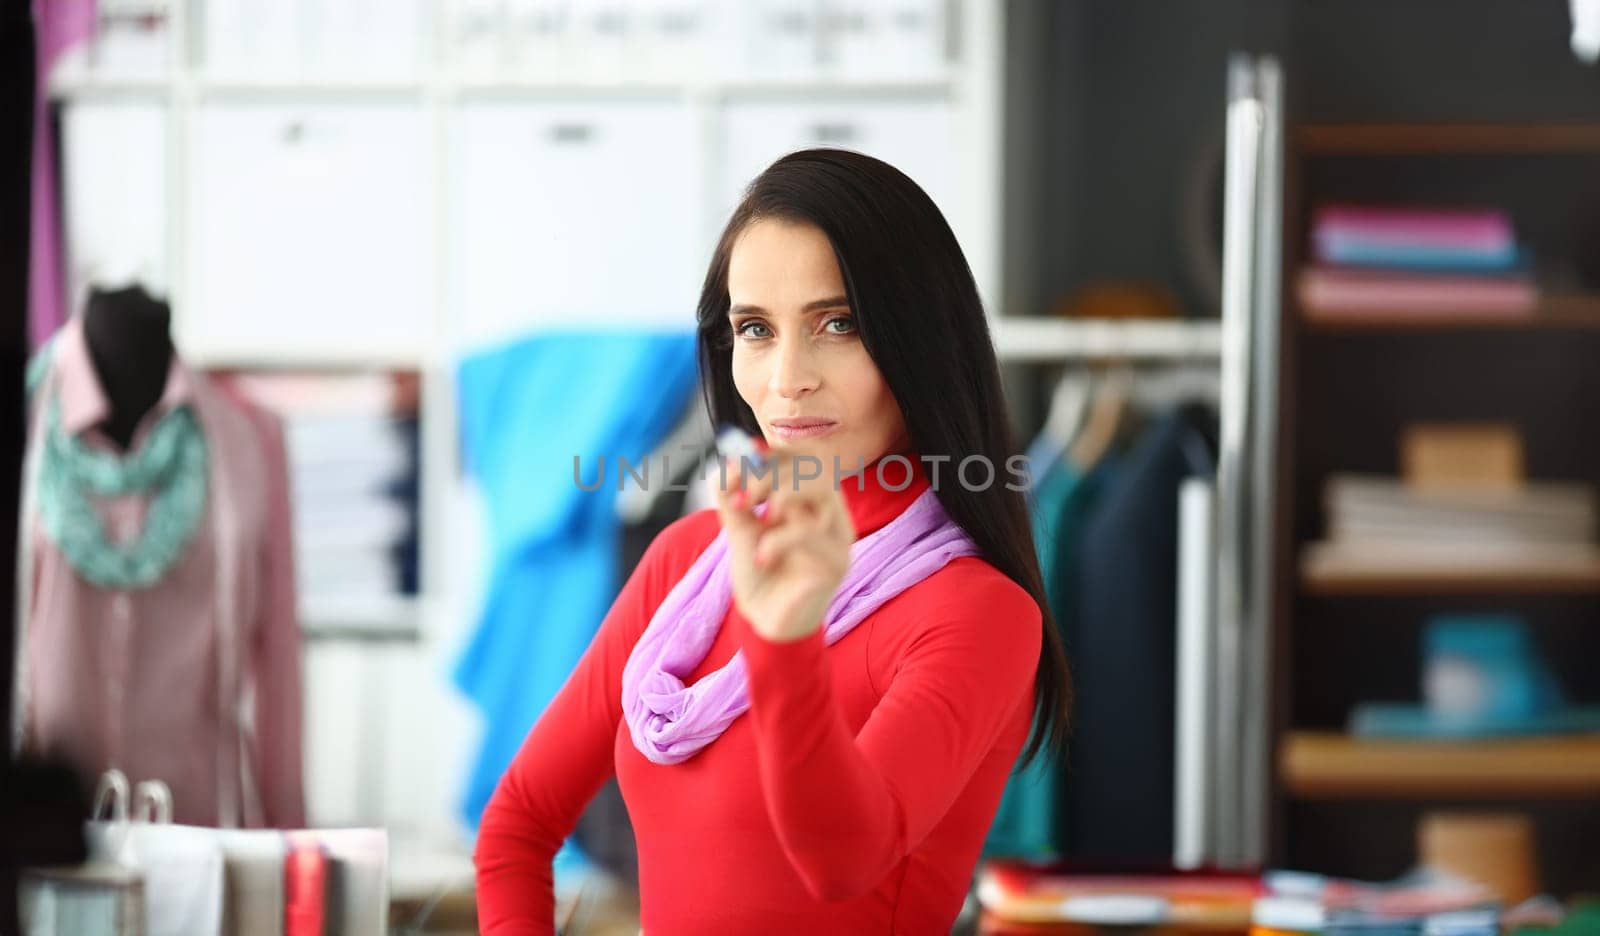 Portrait of beautiful female tailor standing in modern workspace. Smart fashion professional wearing red stylish outfit and pointing at camera with pen. Fashioner workshop concept